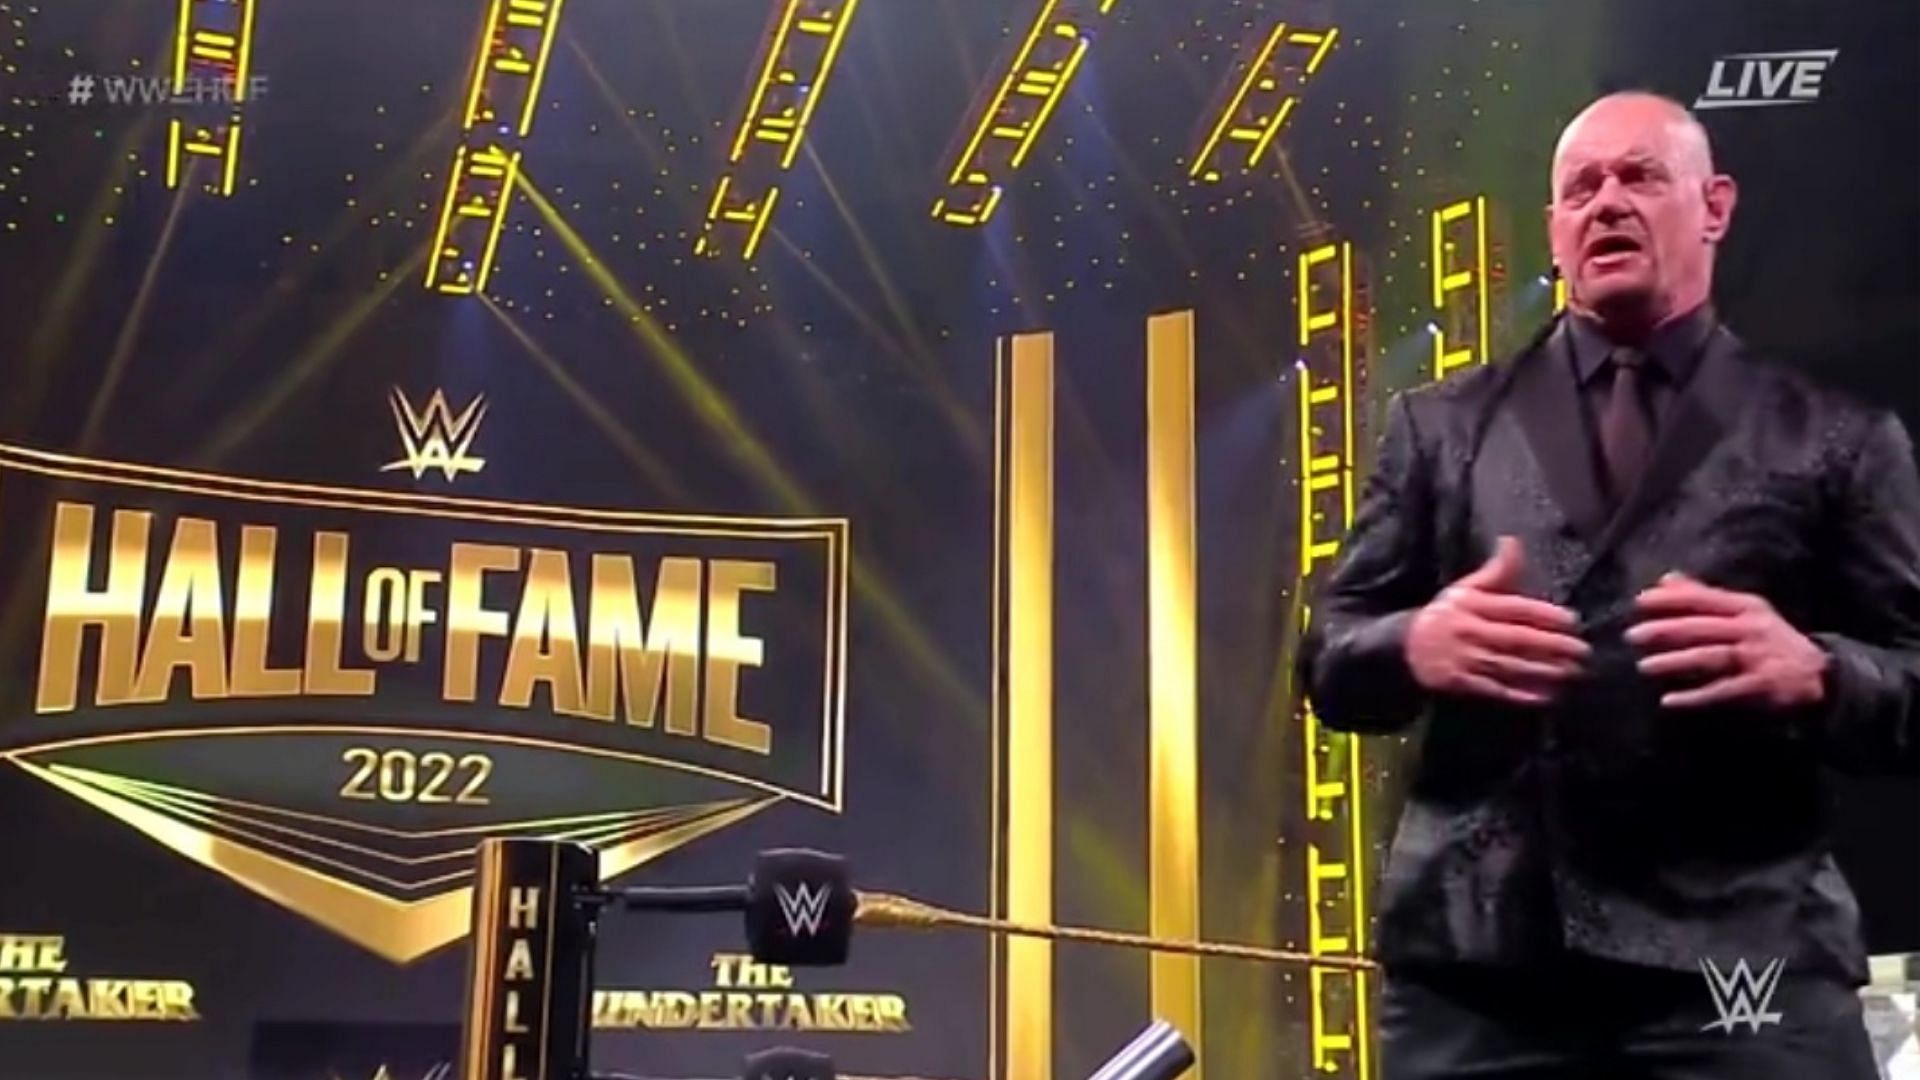 Mark Calaway got inducted into the WWE Hall of Fame.